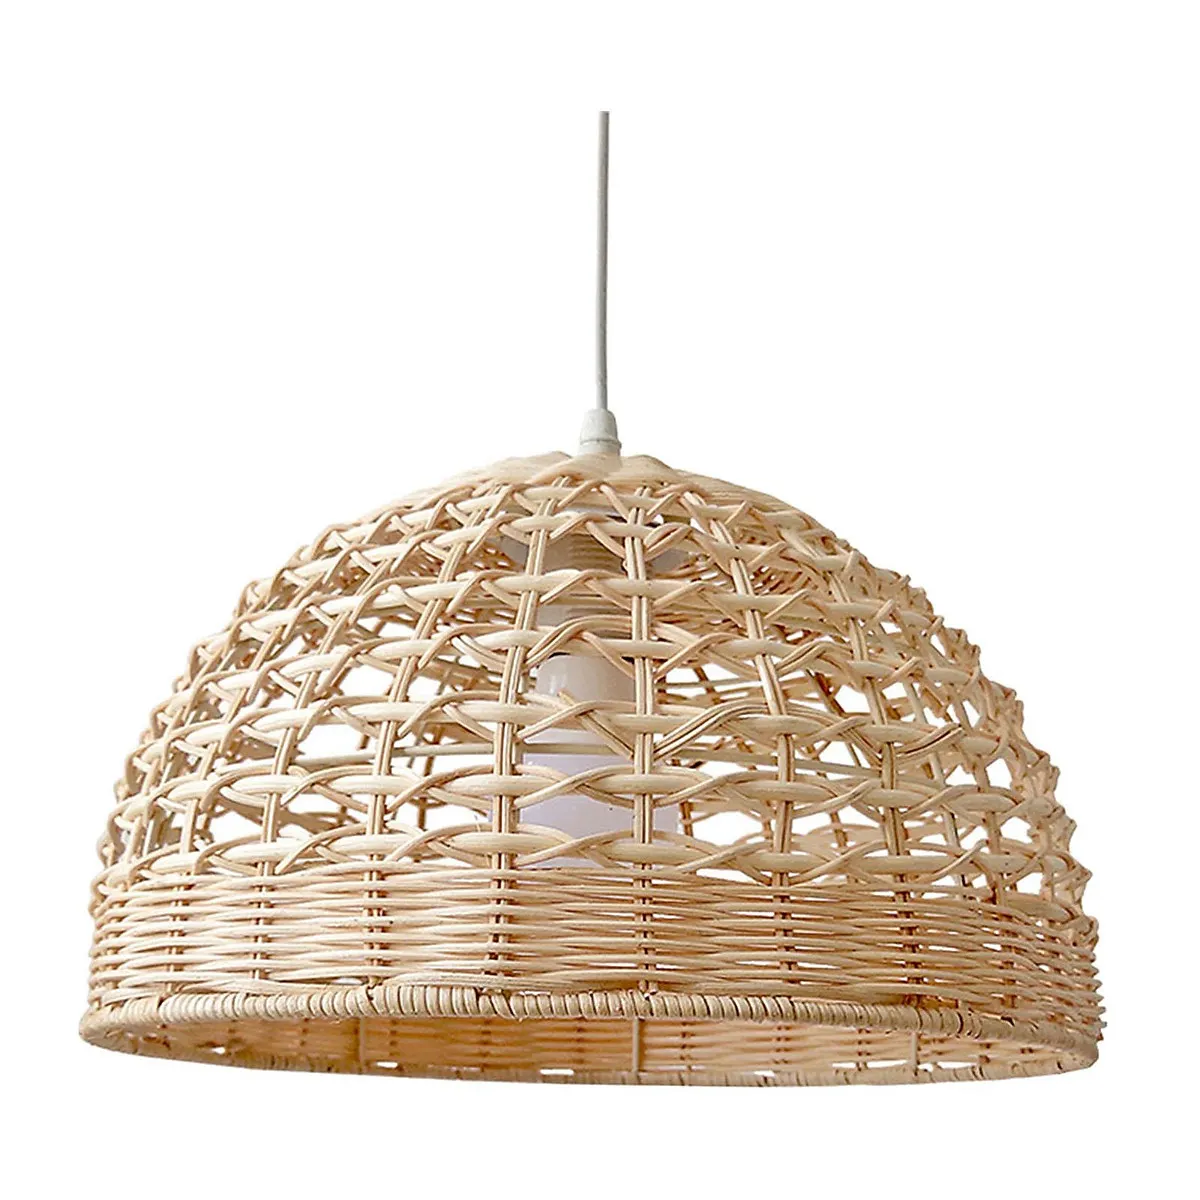 Eco Friendly Rustic Charm Rattan Lampshade Ceiling Pendant Light Shade Handicraft From Vietnam Wholesale